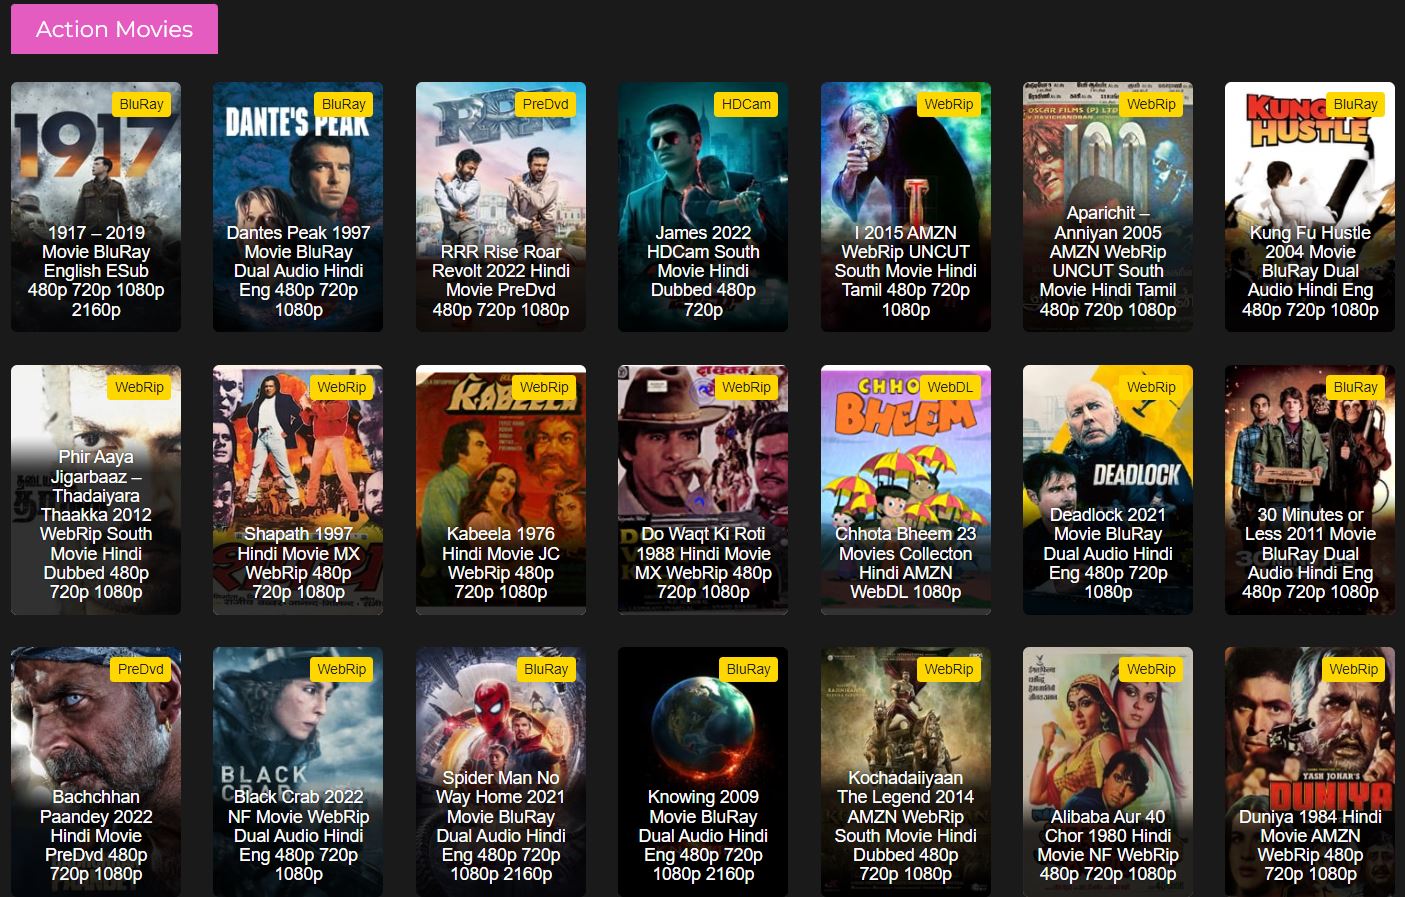 Screenshot of the action movies on mkv cinema.live